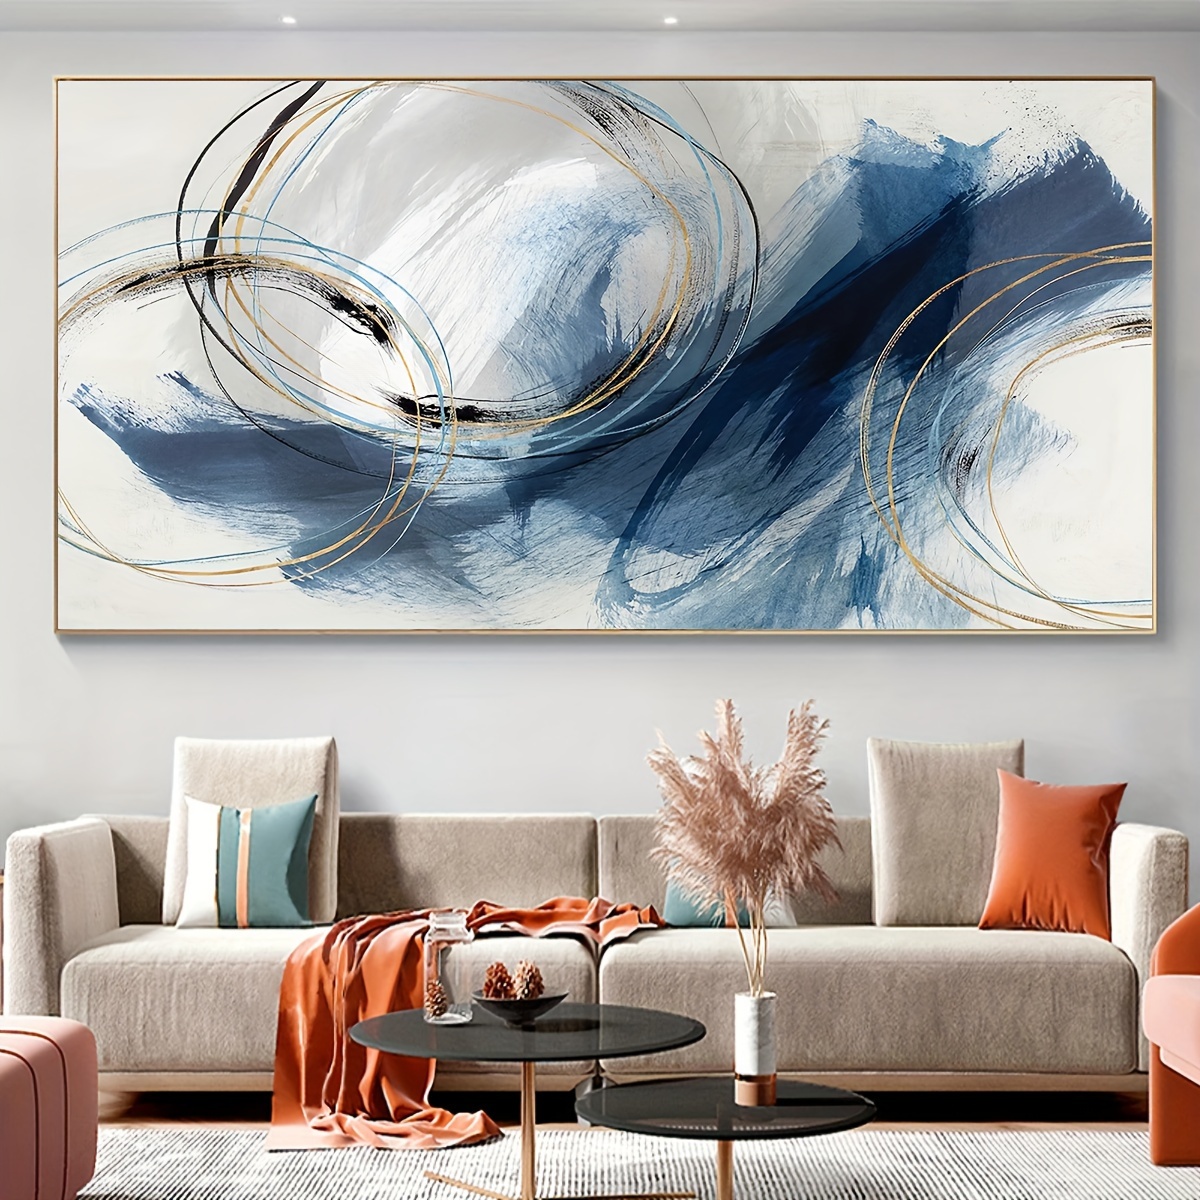 Wieco Art Sea Waves Large Canvas Prints Wall Art Ocean Beach Pictures  Paintings Ready to Hang for Living Room Bedroom Home Decorations Modern